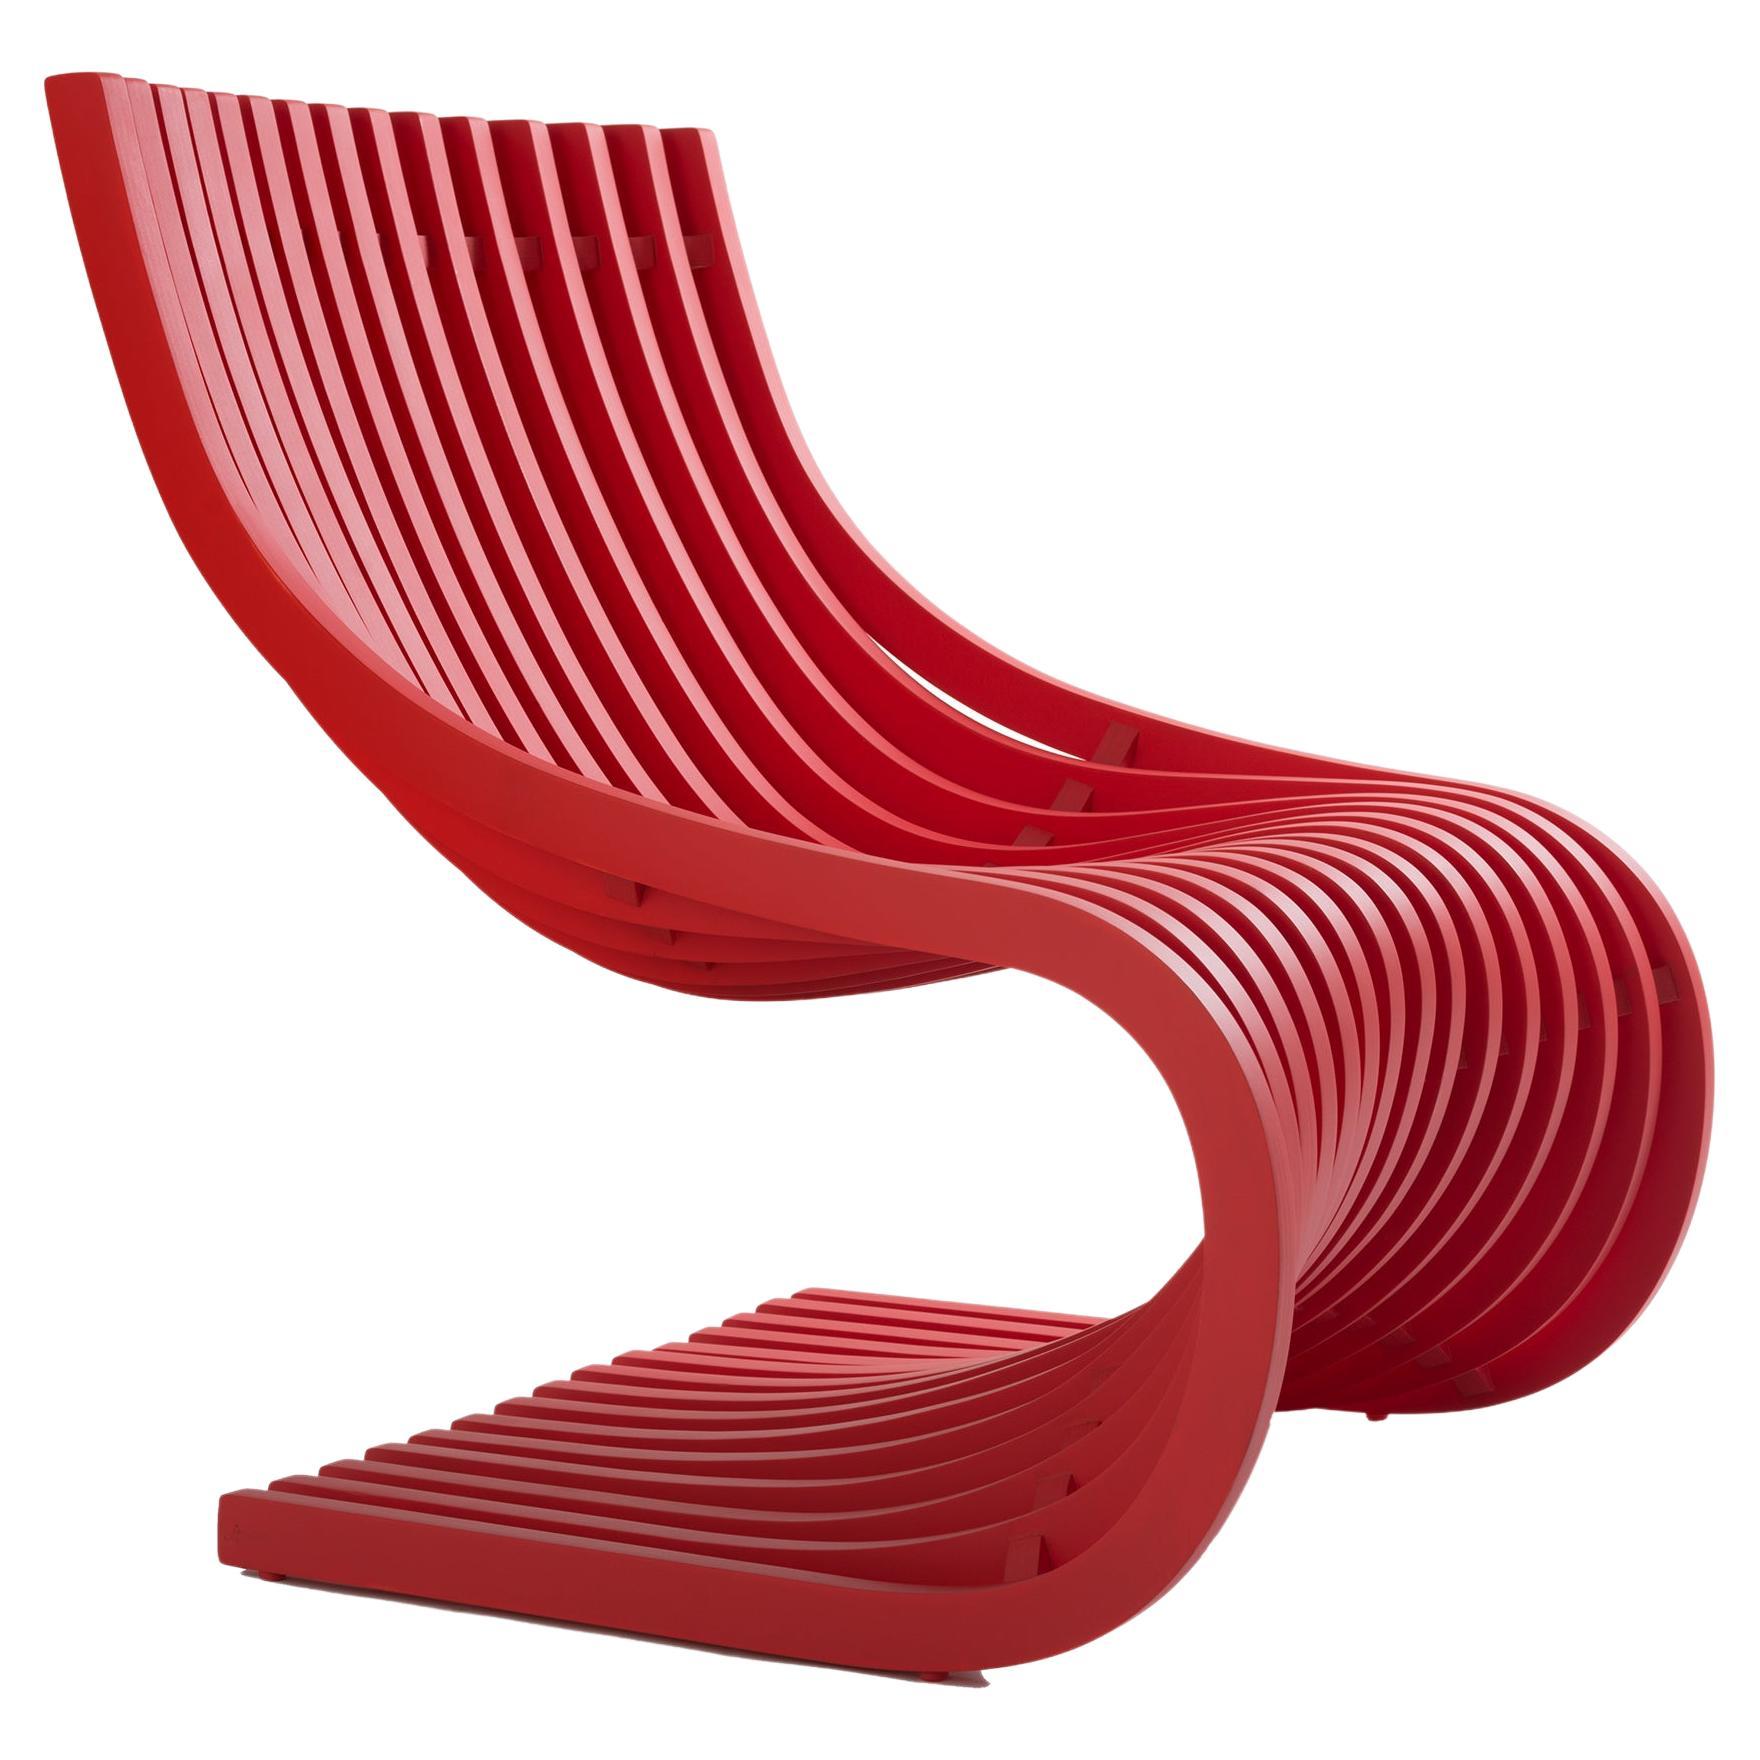 Double S Chair by Piegatto, a Sculptural Contemporary Chair